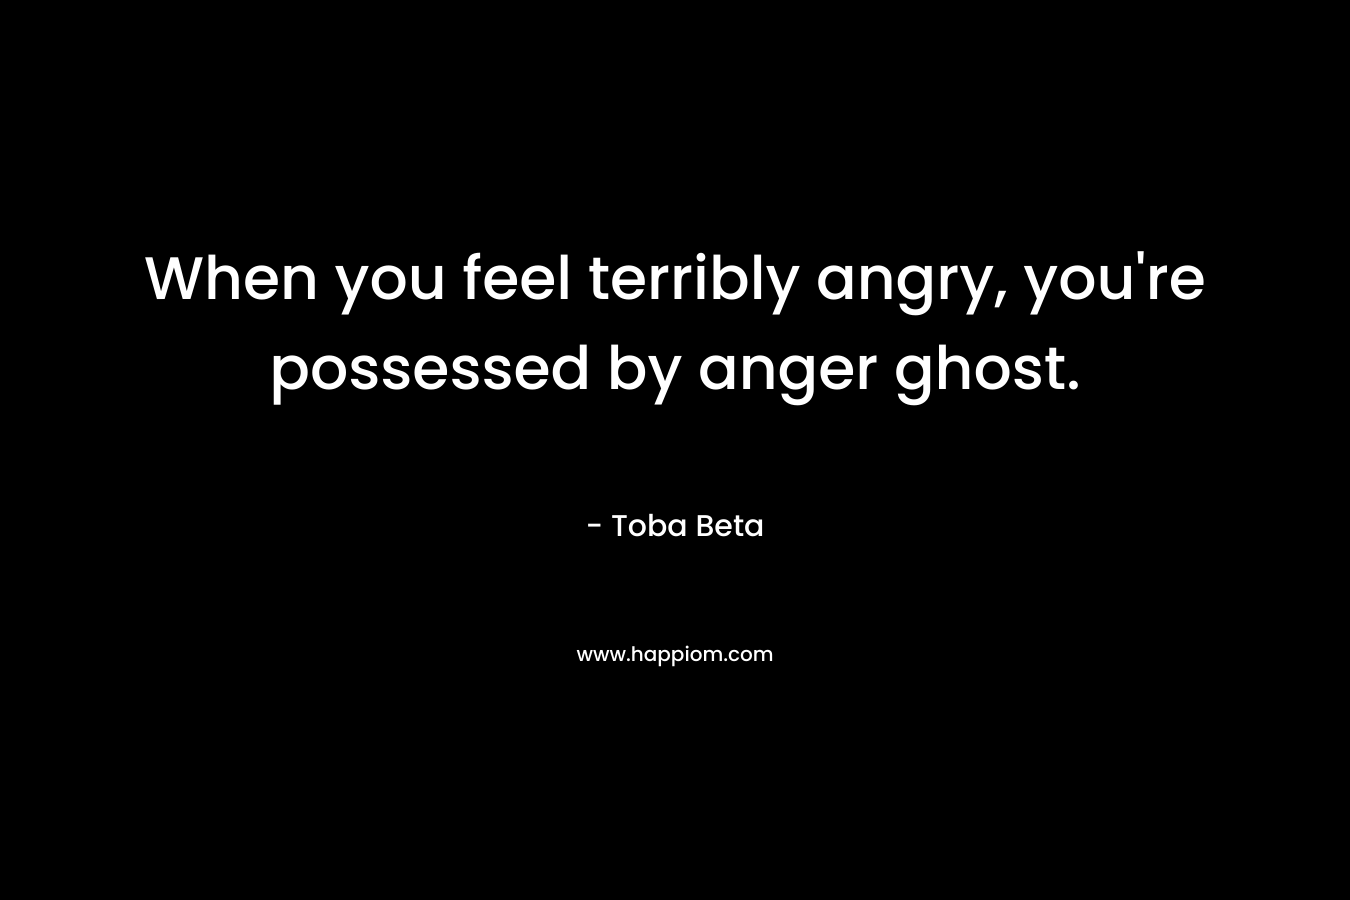 When you feel terribly angry, you’re possessed by anger ghost. – Toba Beta